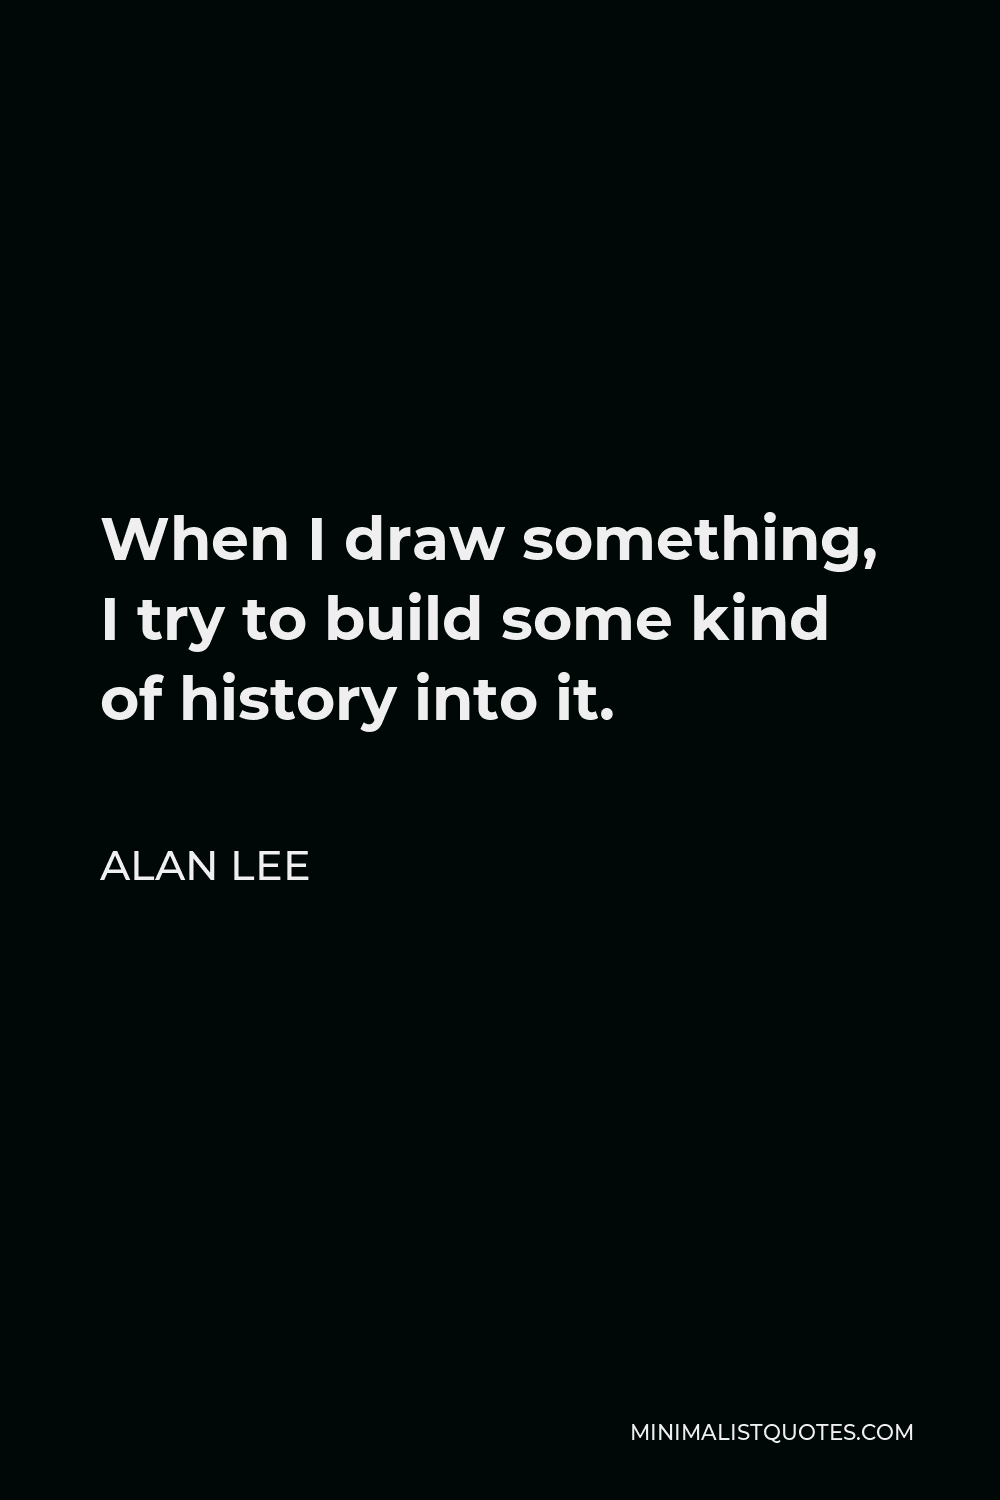 Alan Lee Quote - When I draw something, I try to build some kind of history into it.